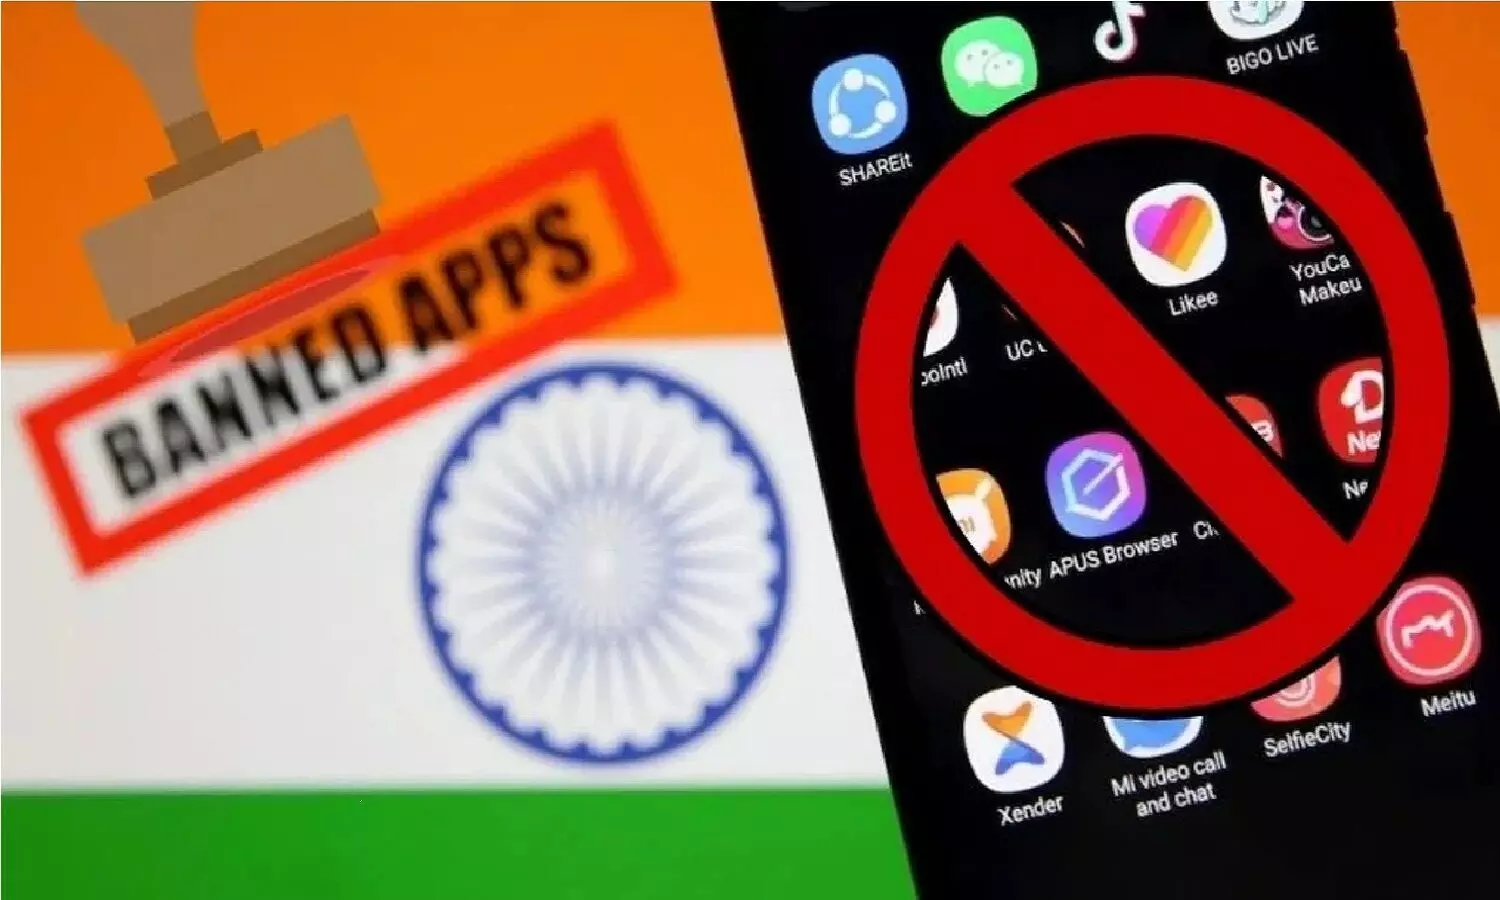 Chinese App ban in India